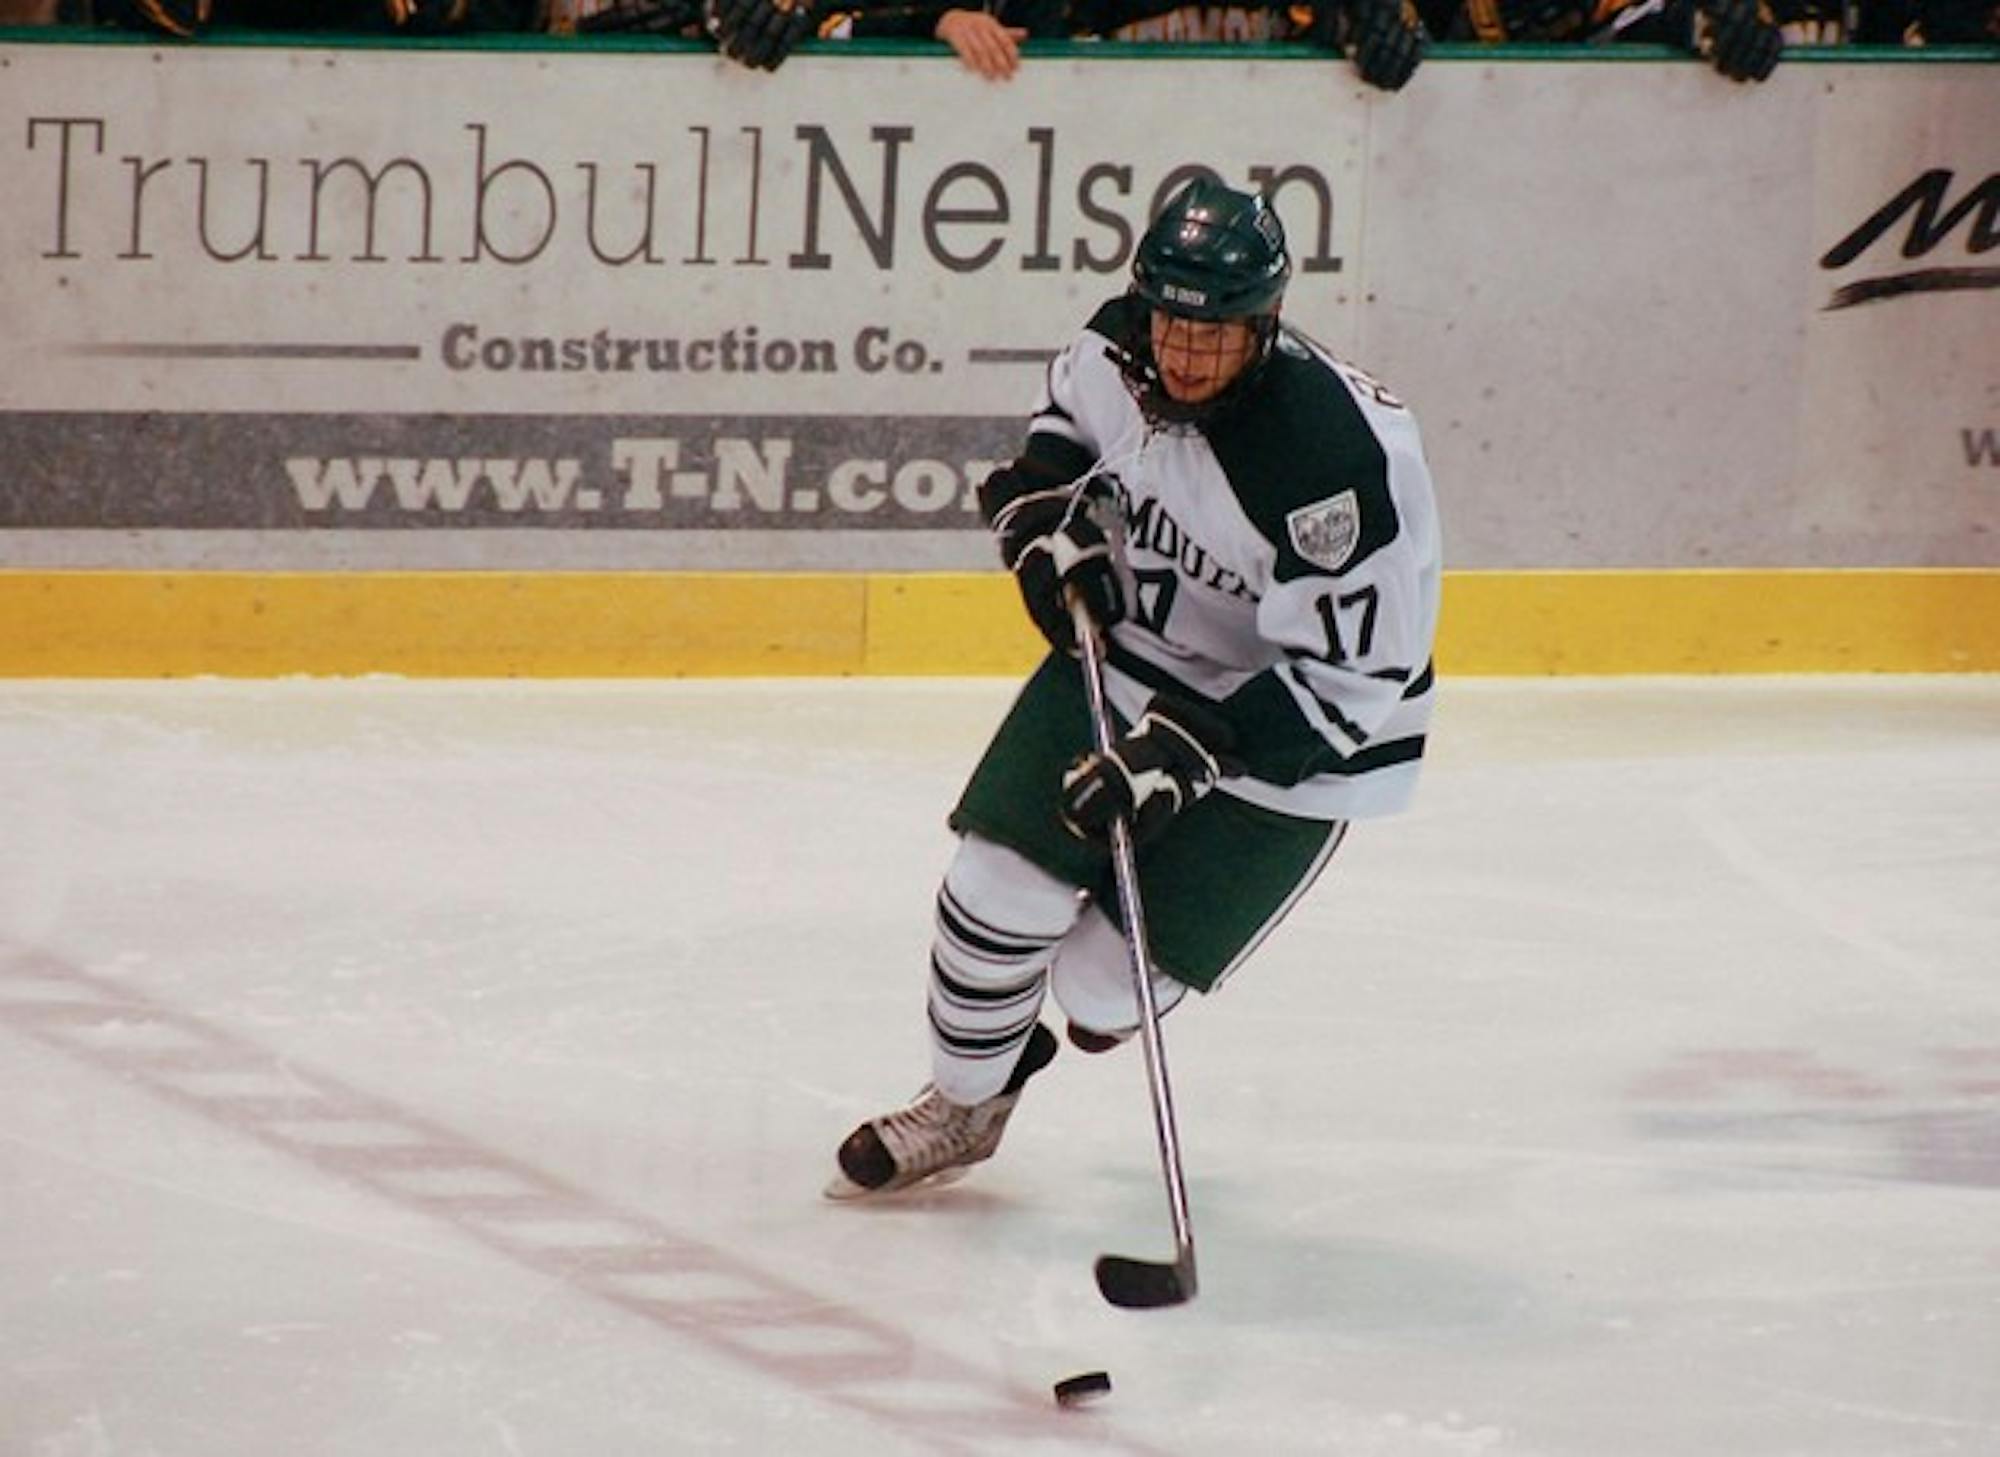 With only one goal, scored by Scott Fleming '10 on the power play, Dartmouth fell to Harvard, 4-1.